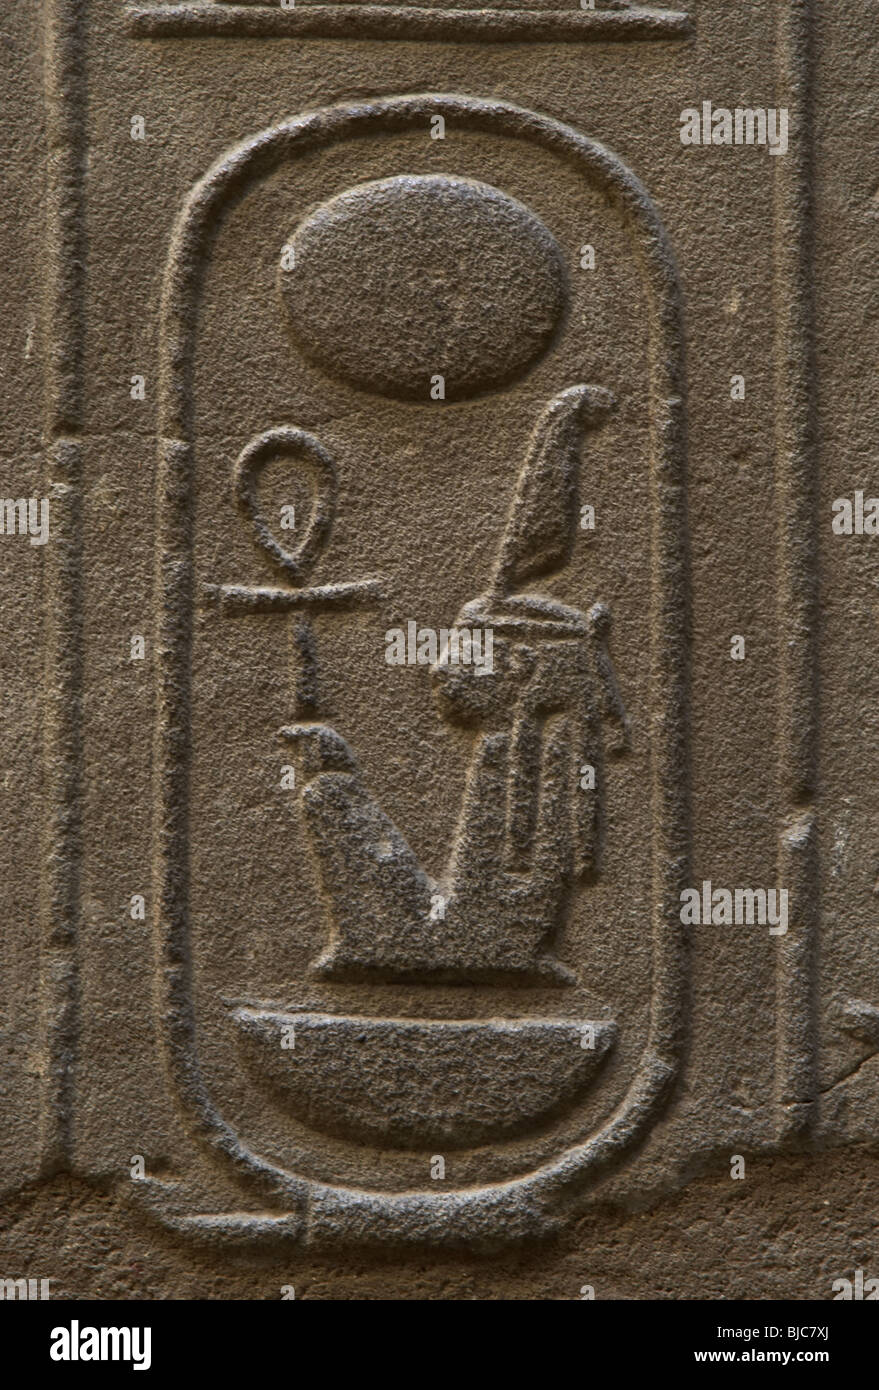 Maat, goddess of wisdom, justice and truth. Royal protocol of Nebmaatre or Amenhotep III. Luxor temple. Egypt. Stock Photo